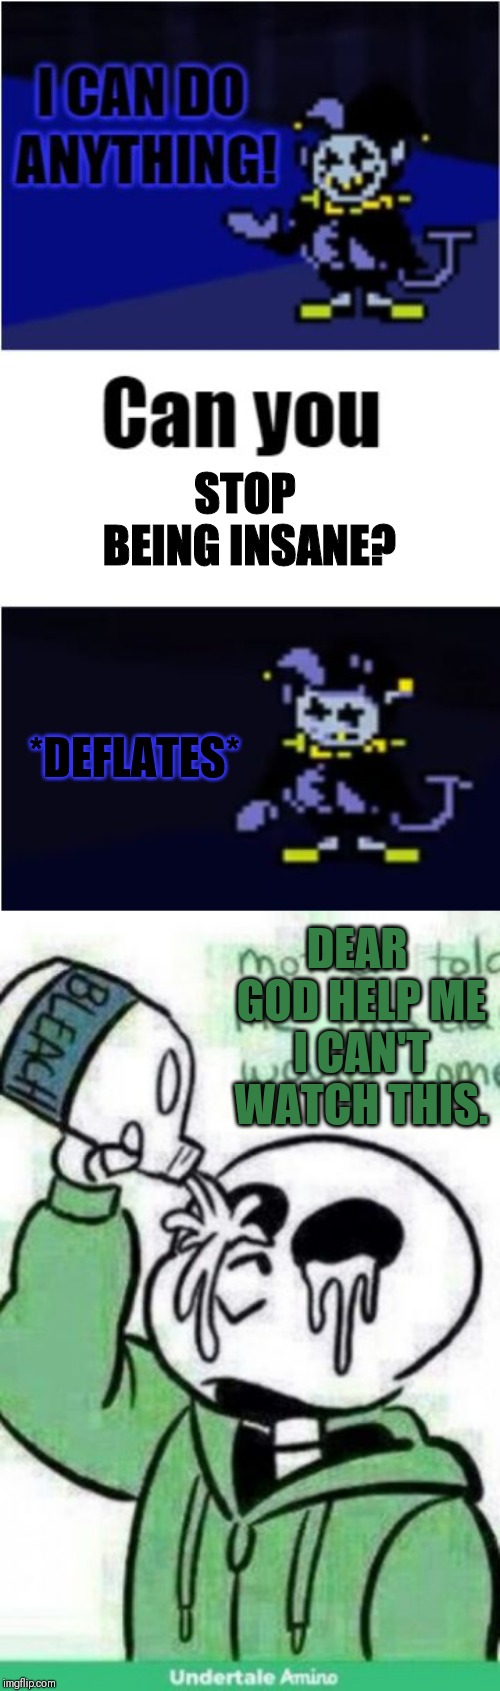 So you CAN'T do anything? | *DEFLATES*; STOP BEING INSANE? DEAR GOD HELP ME I CAN'T WATCH THIS. | image tagged in i can do anything,jevil,sans,deflate | made w/ Imgflip meme maker